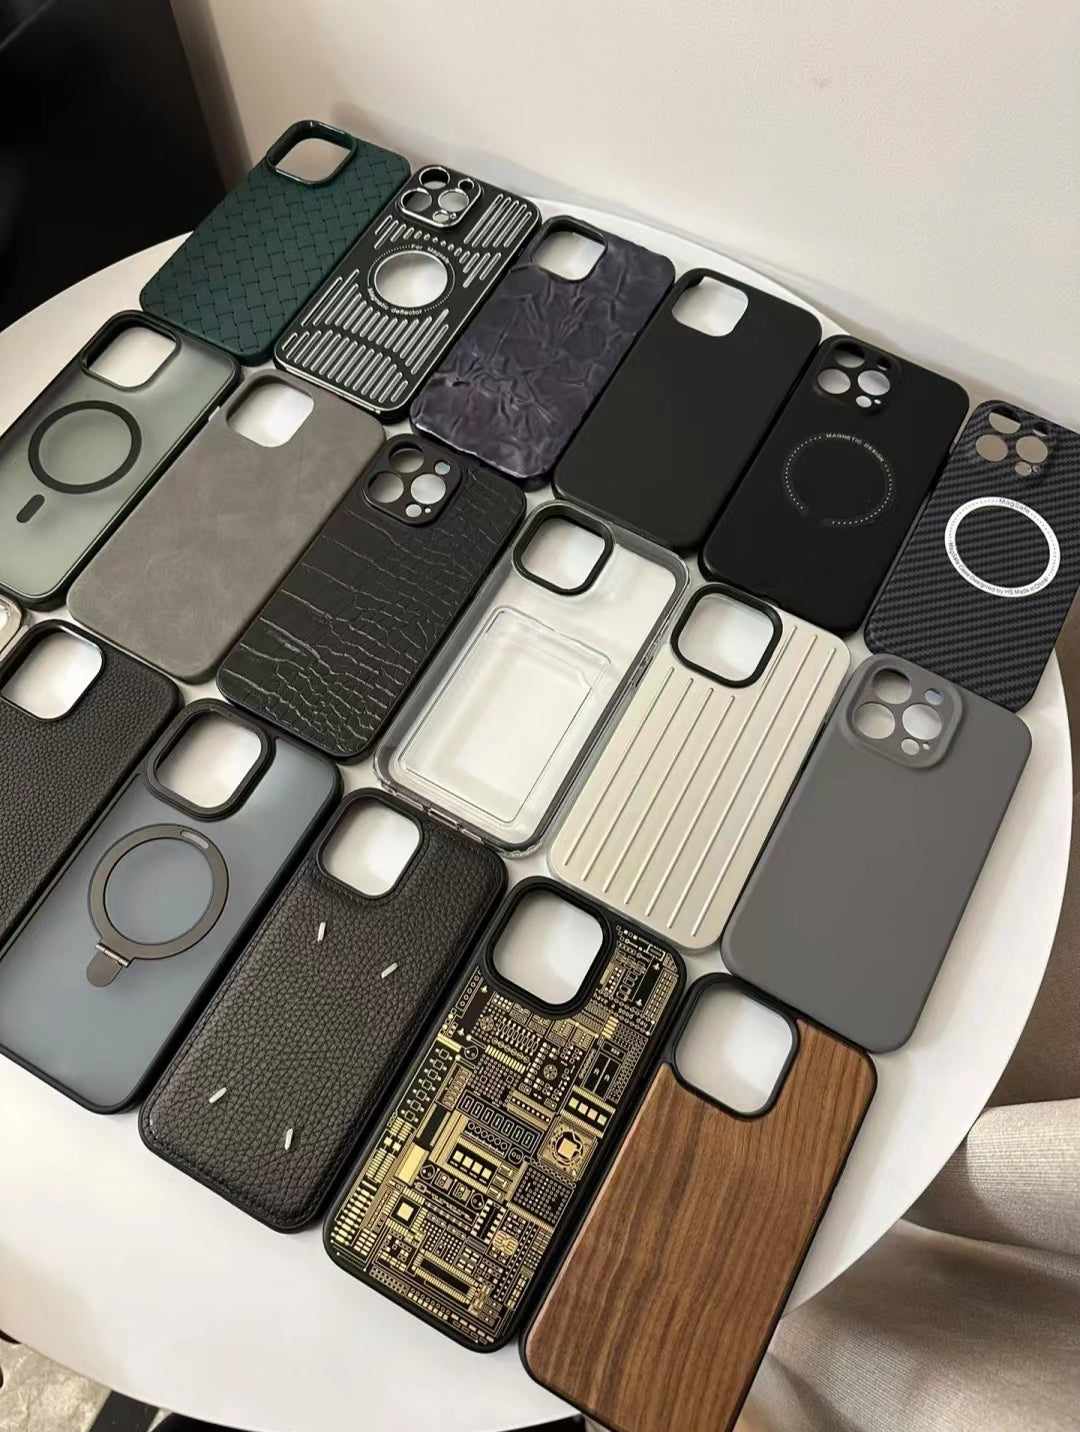 Top IPhone Cases to Have in 2023